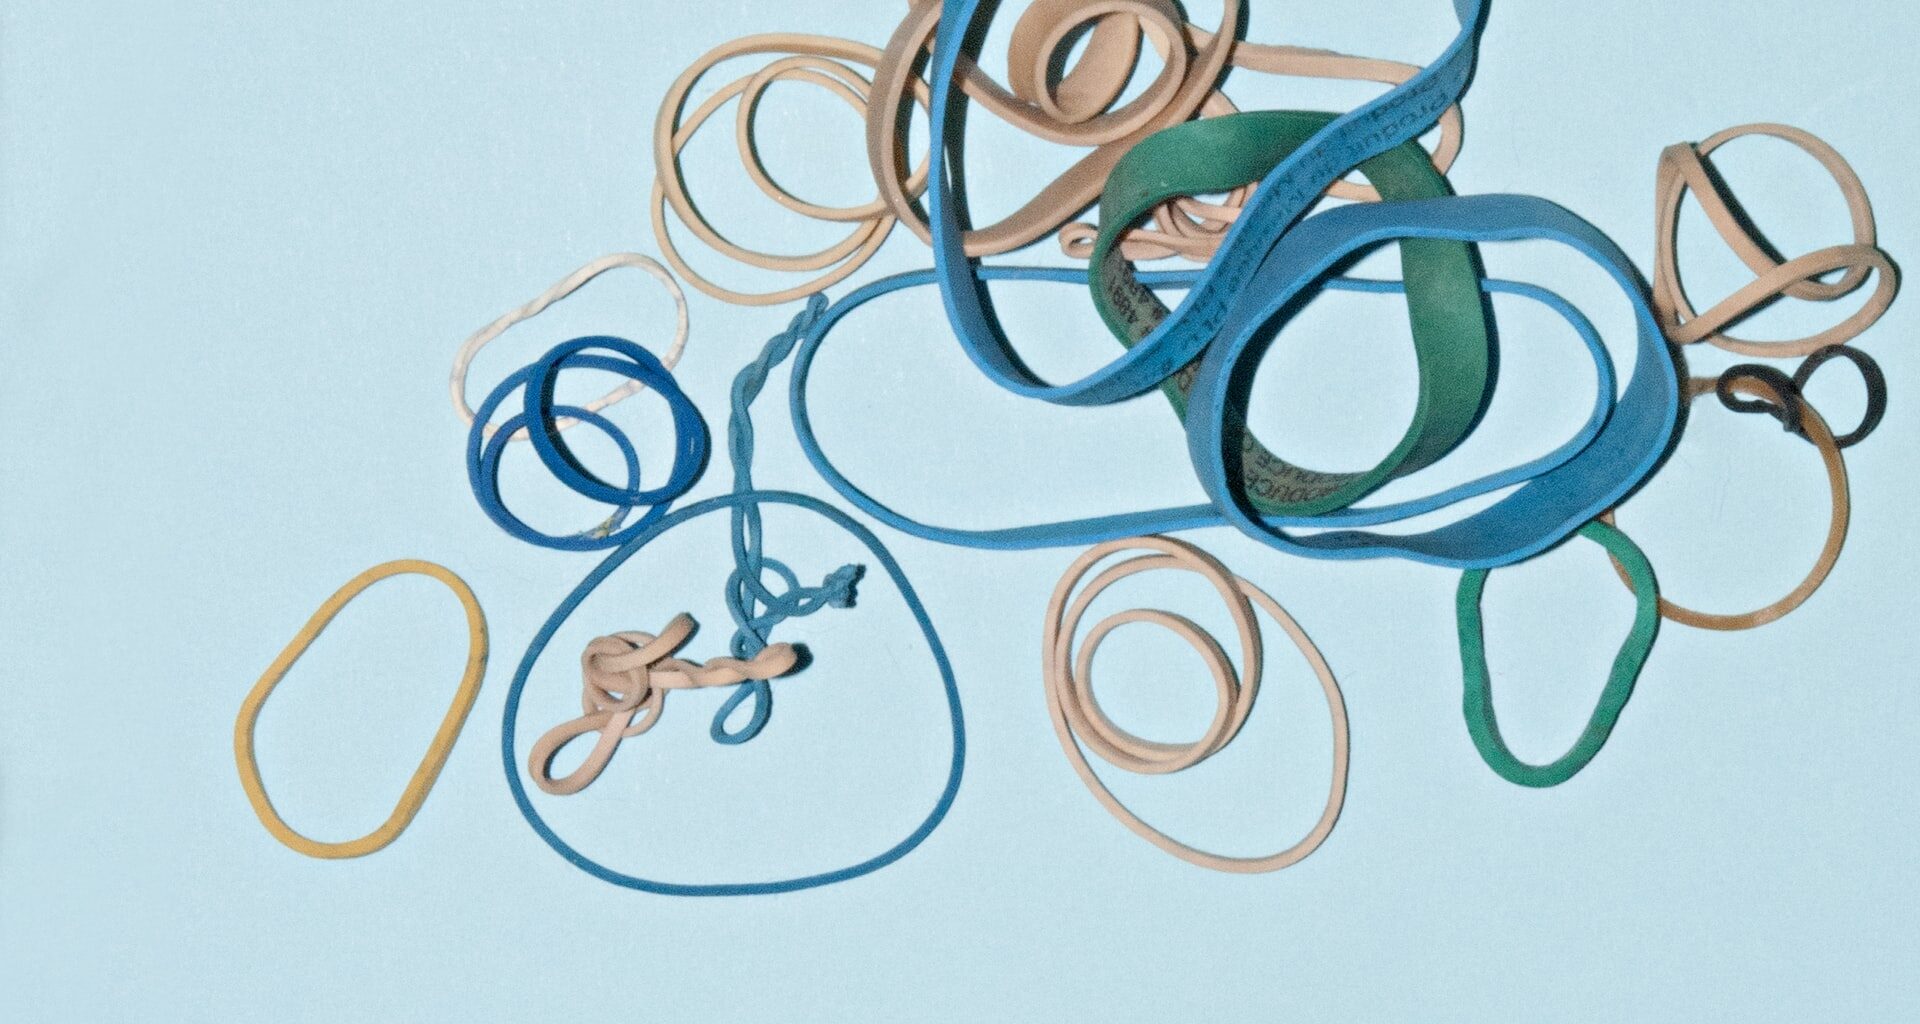 an assortment of rubber bands on a light blue background, all different shapes and sizes